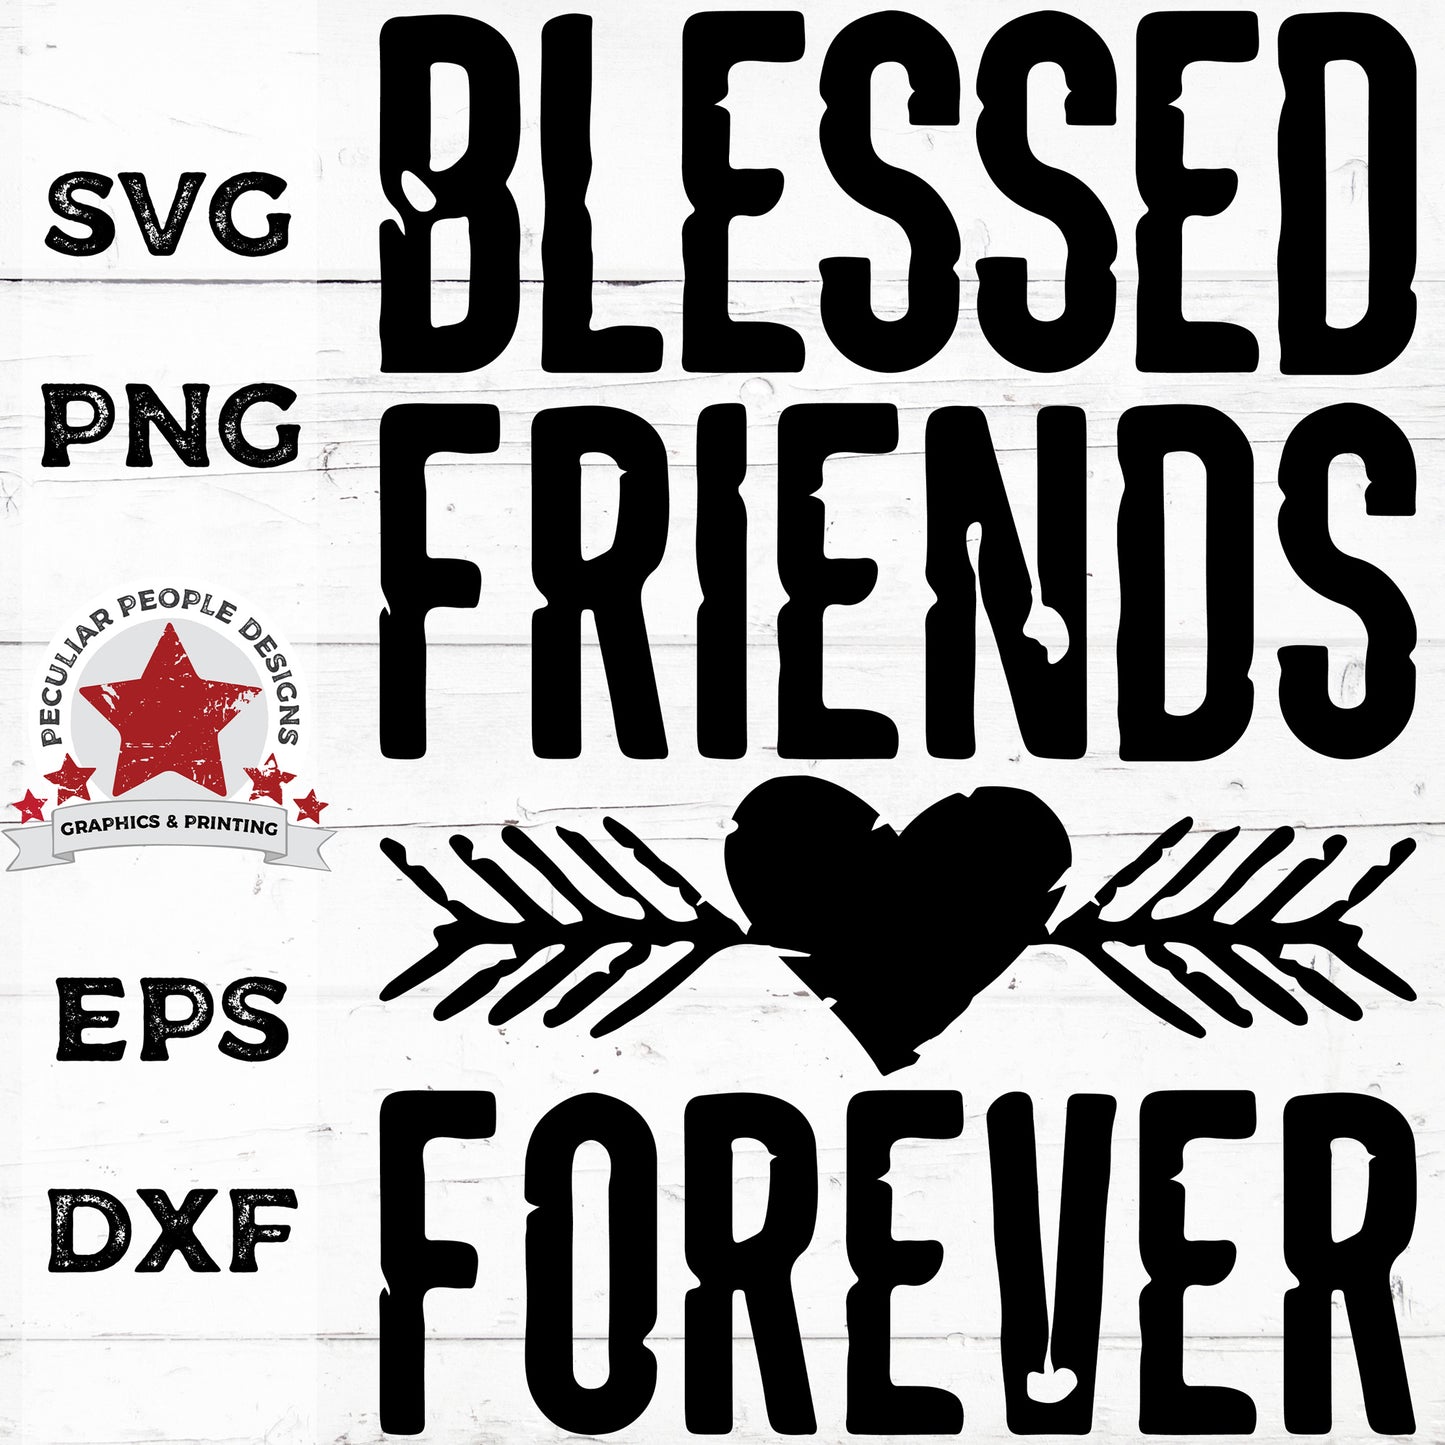 
                  
                    Blessed-Friends-Forever rustic heart-SVG by peculiar-people-designs
                  
                